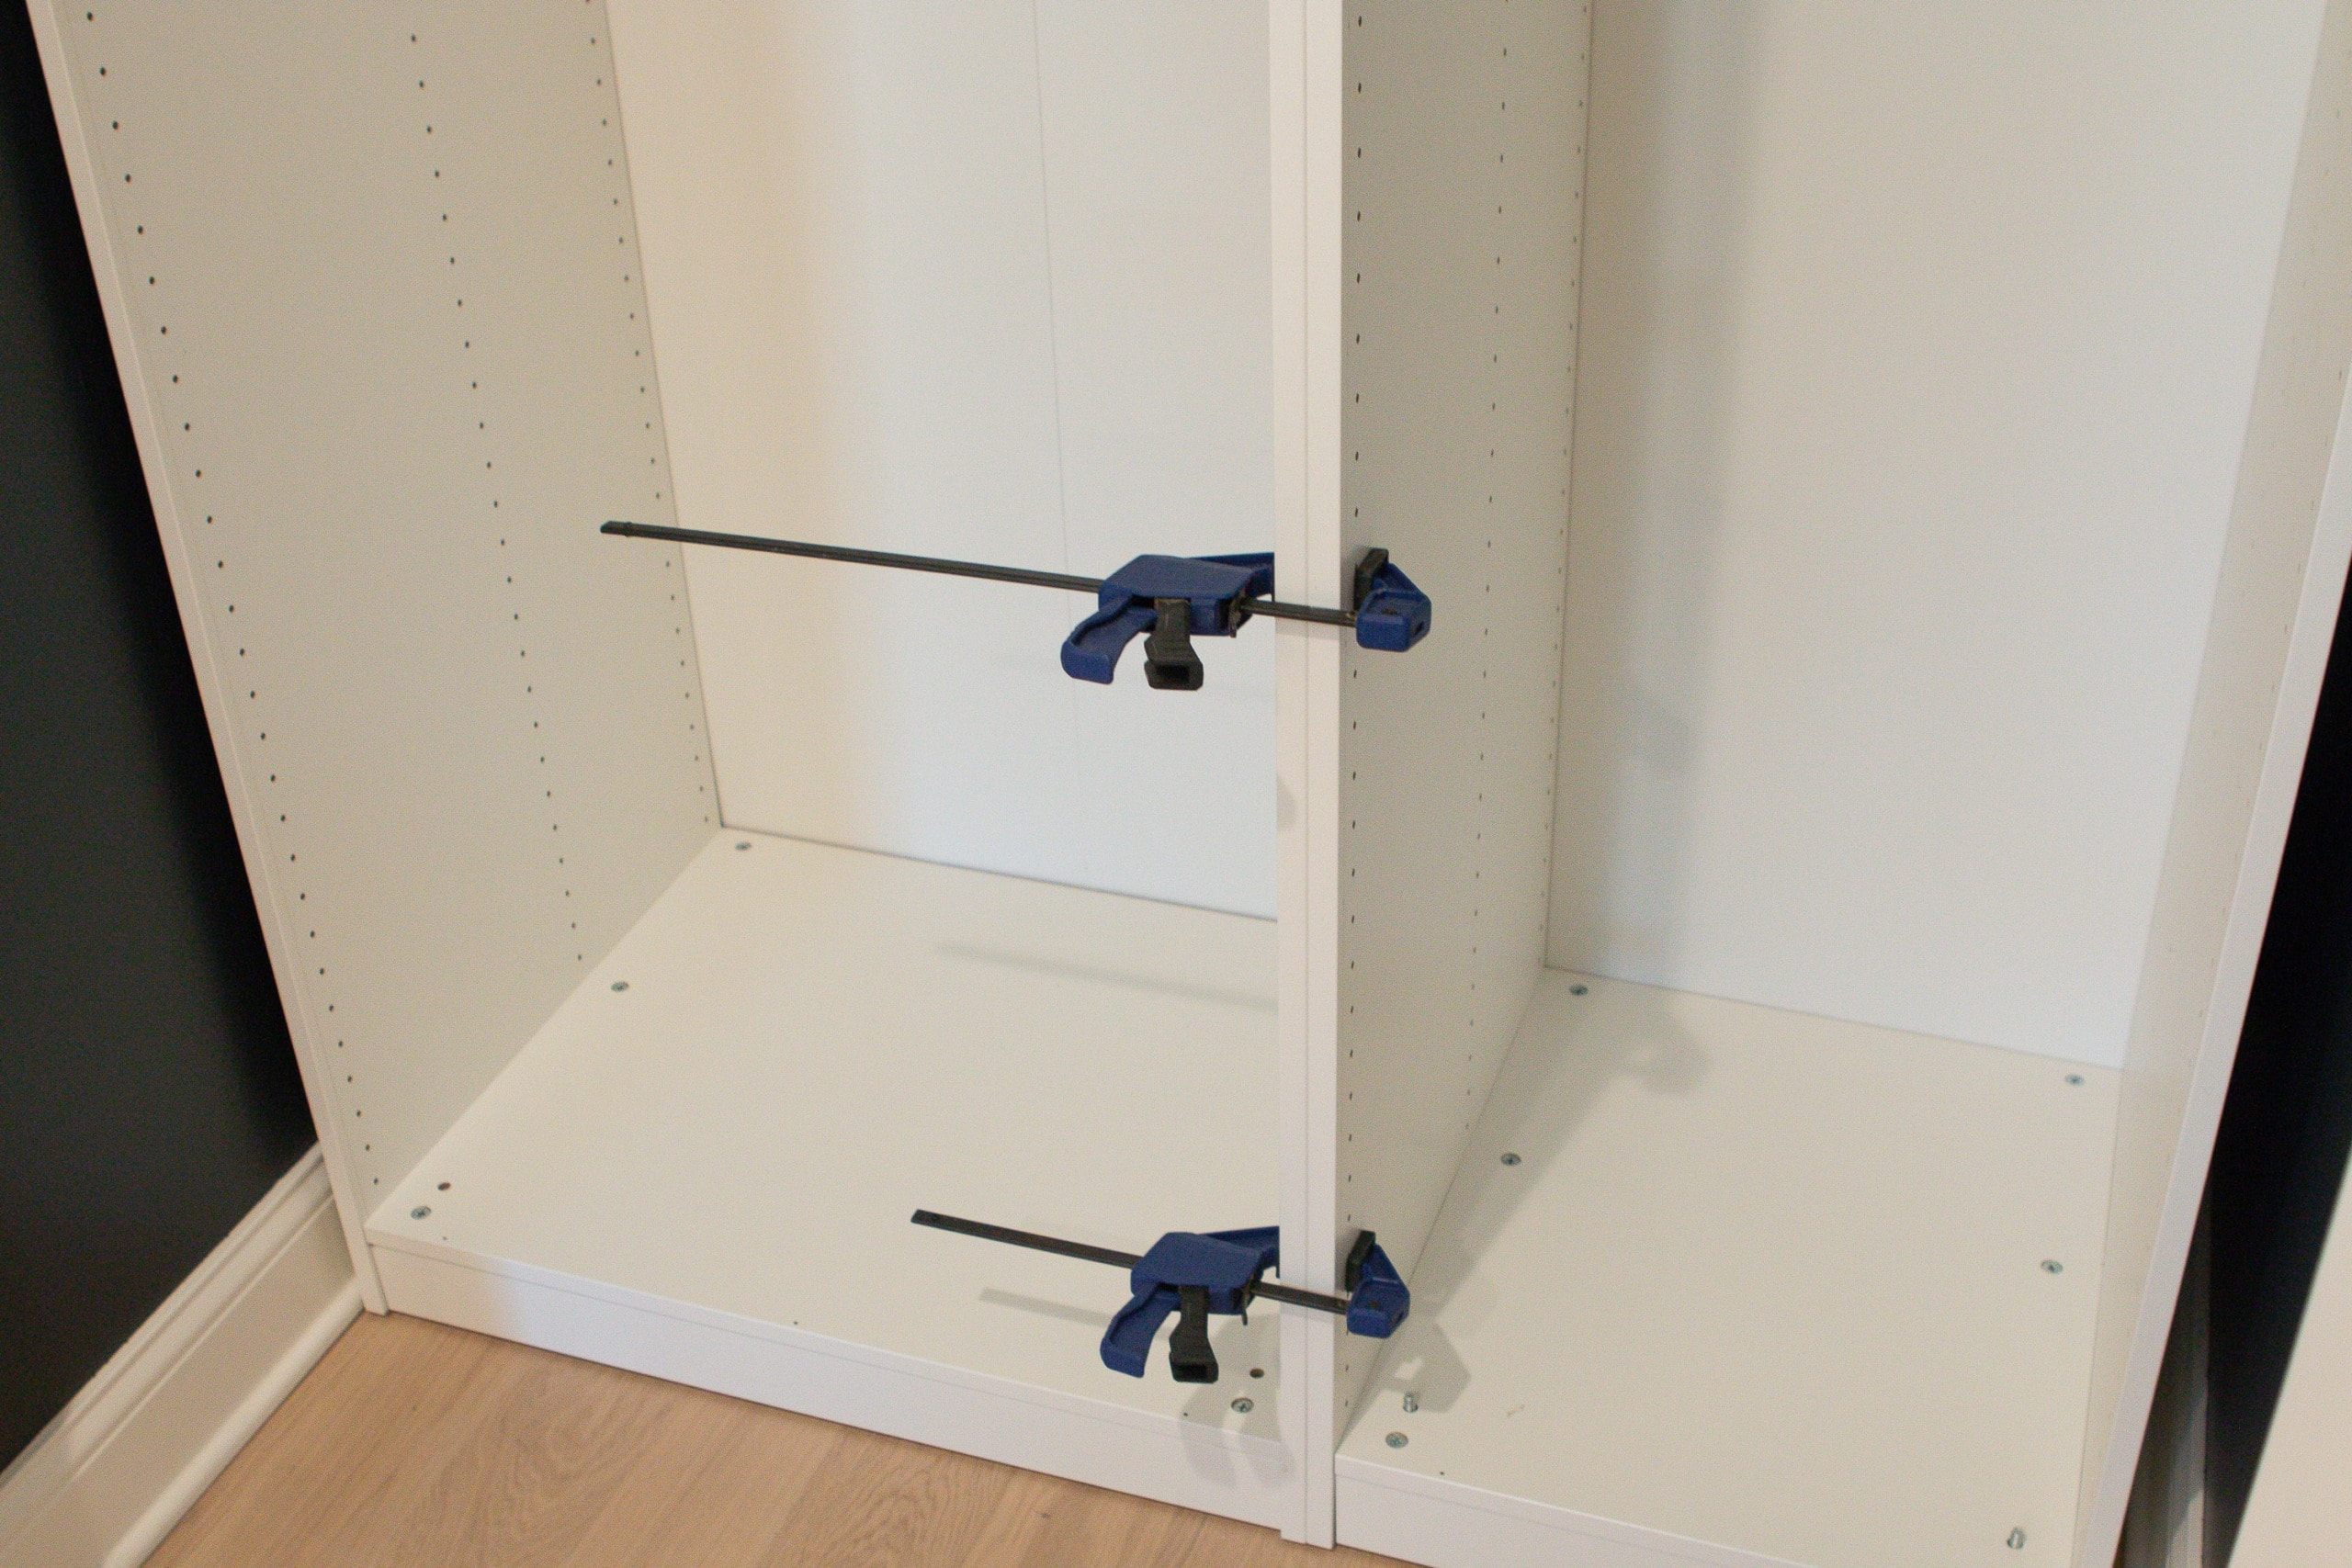 Use clamps to attach the two ikea pax wardrobes together